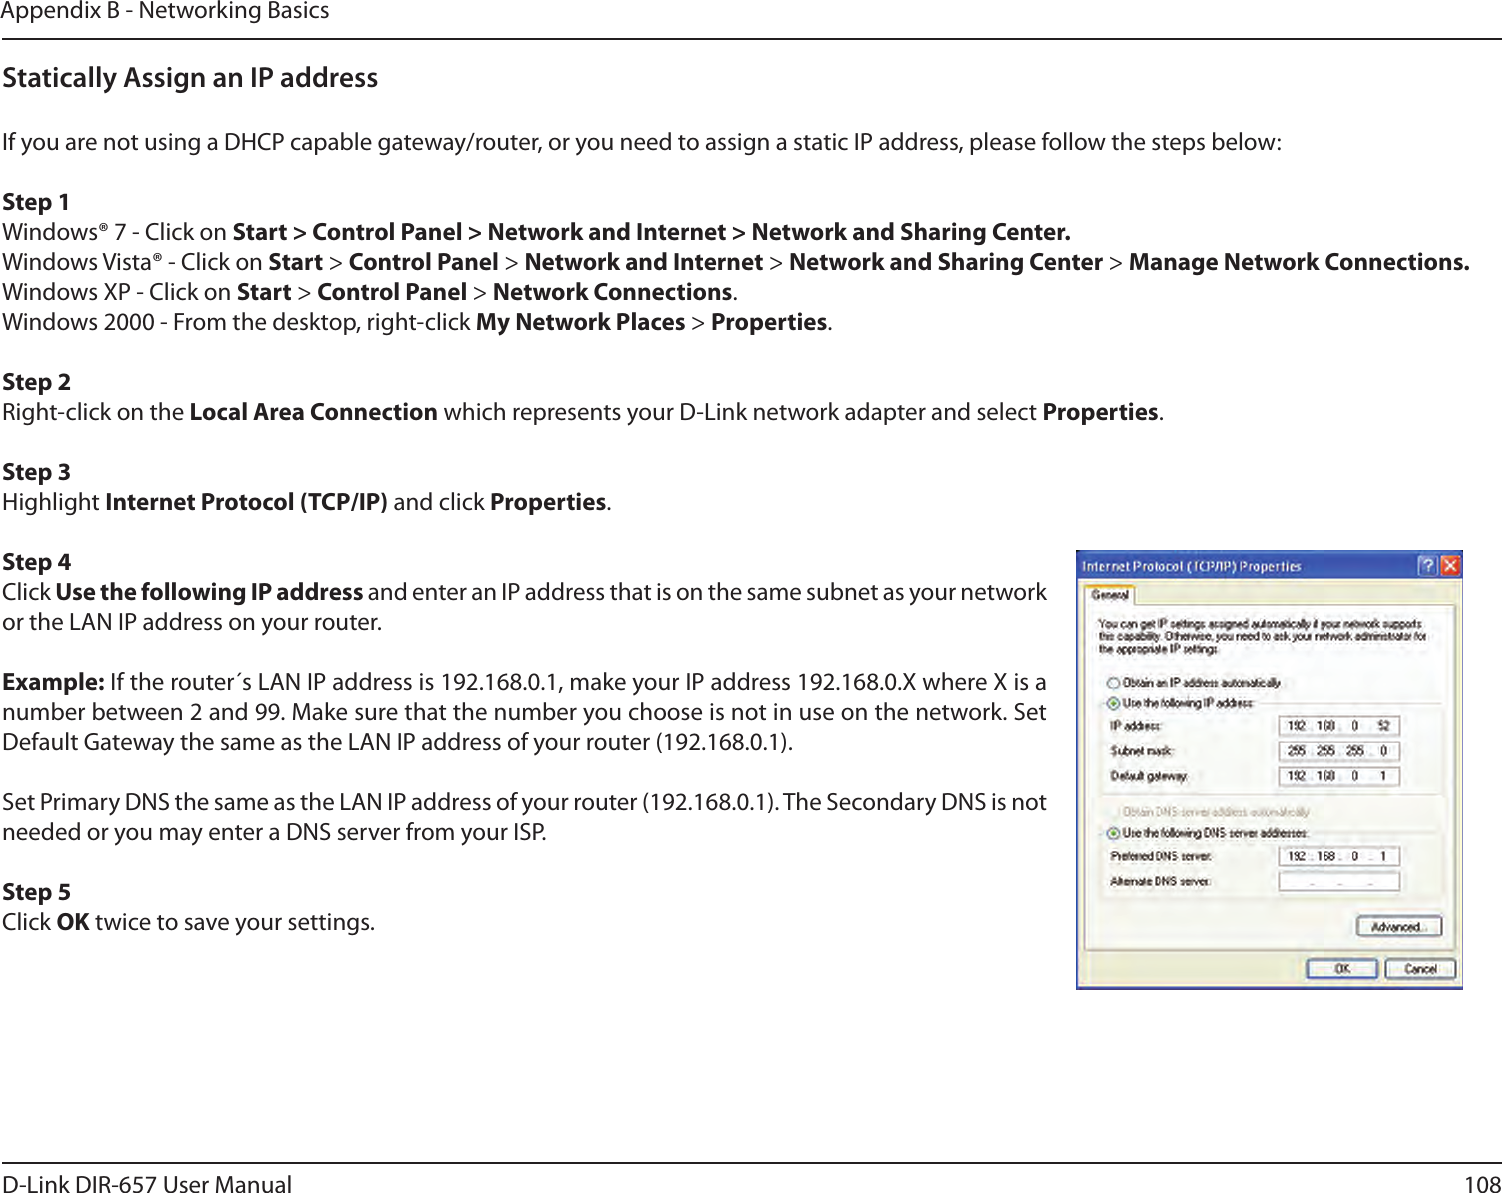 108D-Link DIR-657 User ManualAppendix B - Networking BasicsStatically Assign an IP addressIf you are not using a DHCP capable gateway/router, or you need to assign a static IP address, please follow the steps below:Step 1Windows® 7 - Click on Start &gt; Control Panel &gt; Network and Internet &gt; Network and Sharing Center.Windows Vista® - Click on Start &gt; Control Panel &gt; Network and Internet &gt; Network and Sharing Center &gt; Manage Network Connections.Windows XP - Click on Start &gt; Control Panel &gt; Network Connections.Windows 2000 - From the desktop, right-click My Network Places &gt; Properties.Step 2Right-click on the Local Area Connection which represents your D-Link network adapter and select Properties.Step 3Highlight Internet Protocol (TCP/IP) and click Properties.Step 4Click Use the following IP address and enter an IP address that is on the same subnet as your network or the LAN IP address on your router. Example: If the router´s LAN IP address is 192.168.0.1, make your IP address 192.168.0.X where X is a number between 2 and 99. Make sure that the number you choose is not in use on the network. Set Default Gateway the same as the LAN IP address of your router (192.168.0.1). Set Primary DNS the same as the LAN IP address of your router (192.168.0.1). The Secondary DNS is not needed or you may enter a DNS server from your ISP.Step 5Click OK twice to save your settings.